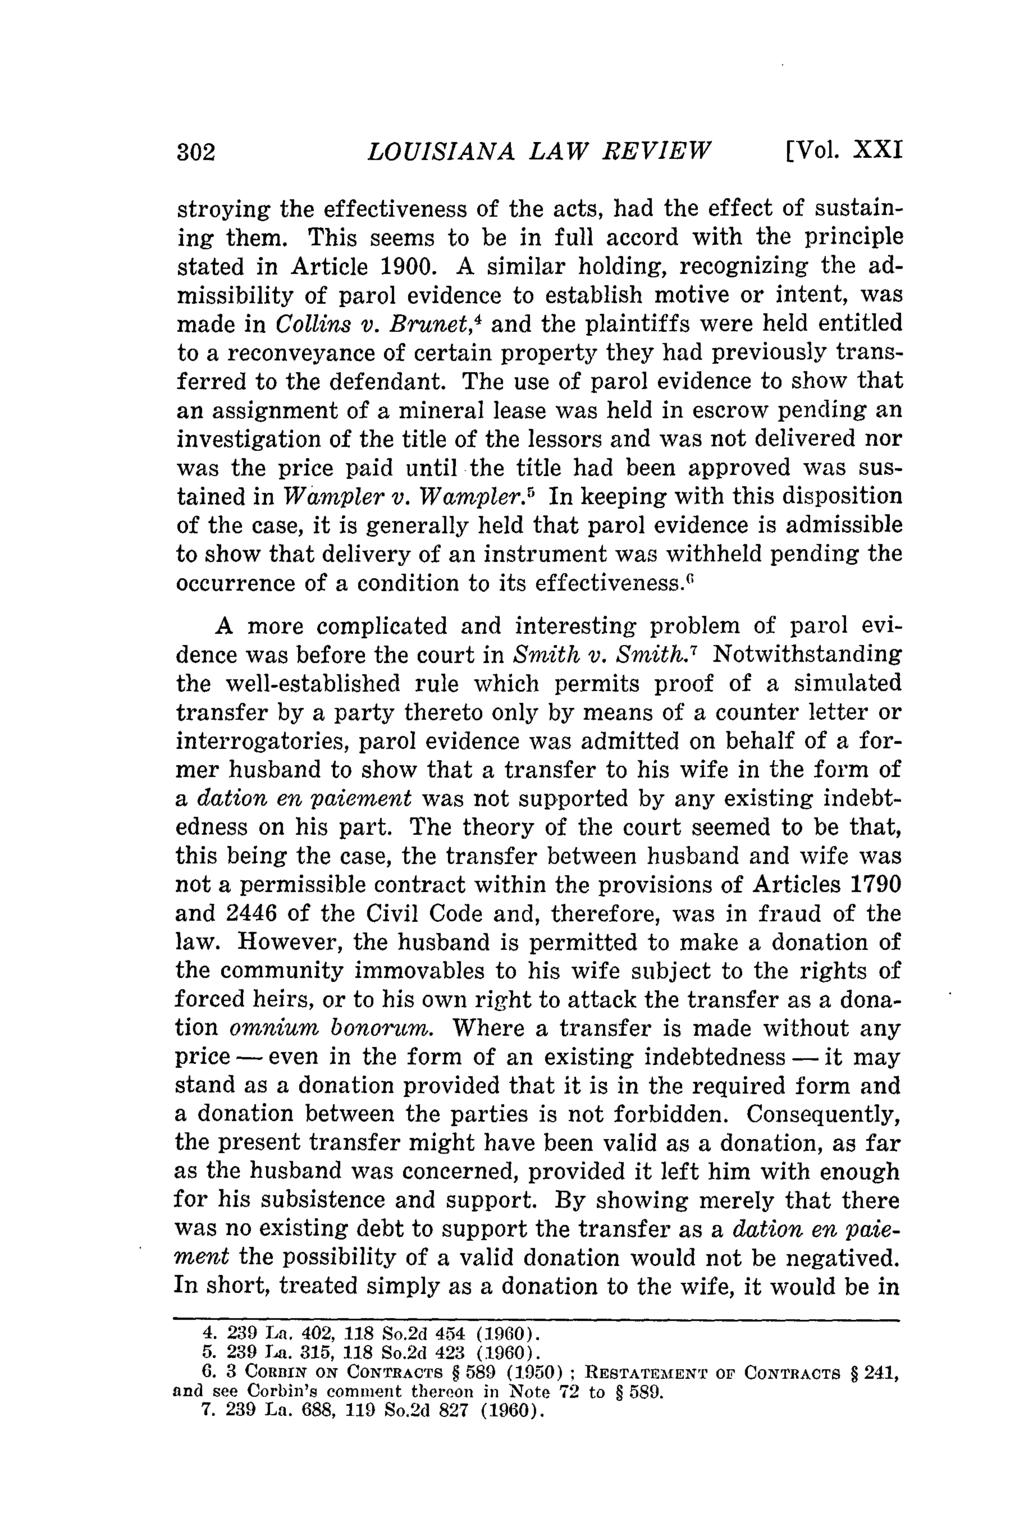 LOUISIANA LAW REVIEW [Vol. XXI stroying the effectiveness of the acts, had the effect of sustaining them. This seems to be in full accord with the principle stated in Article 1900.